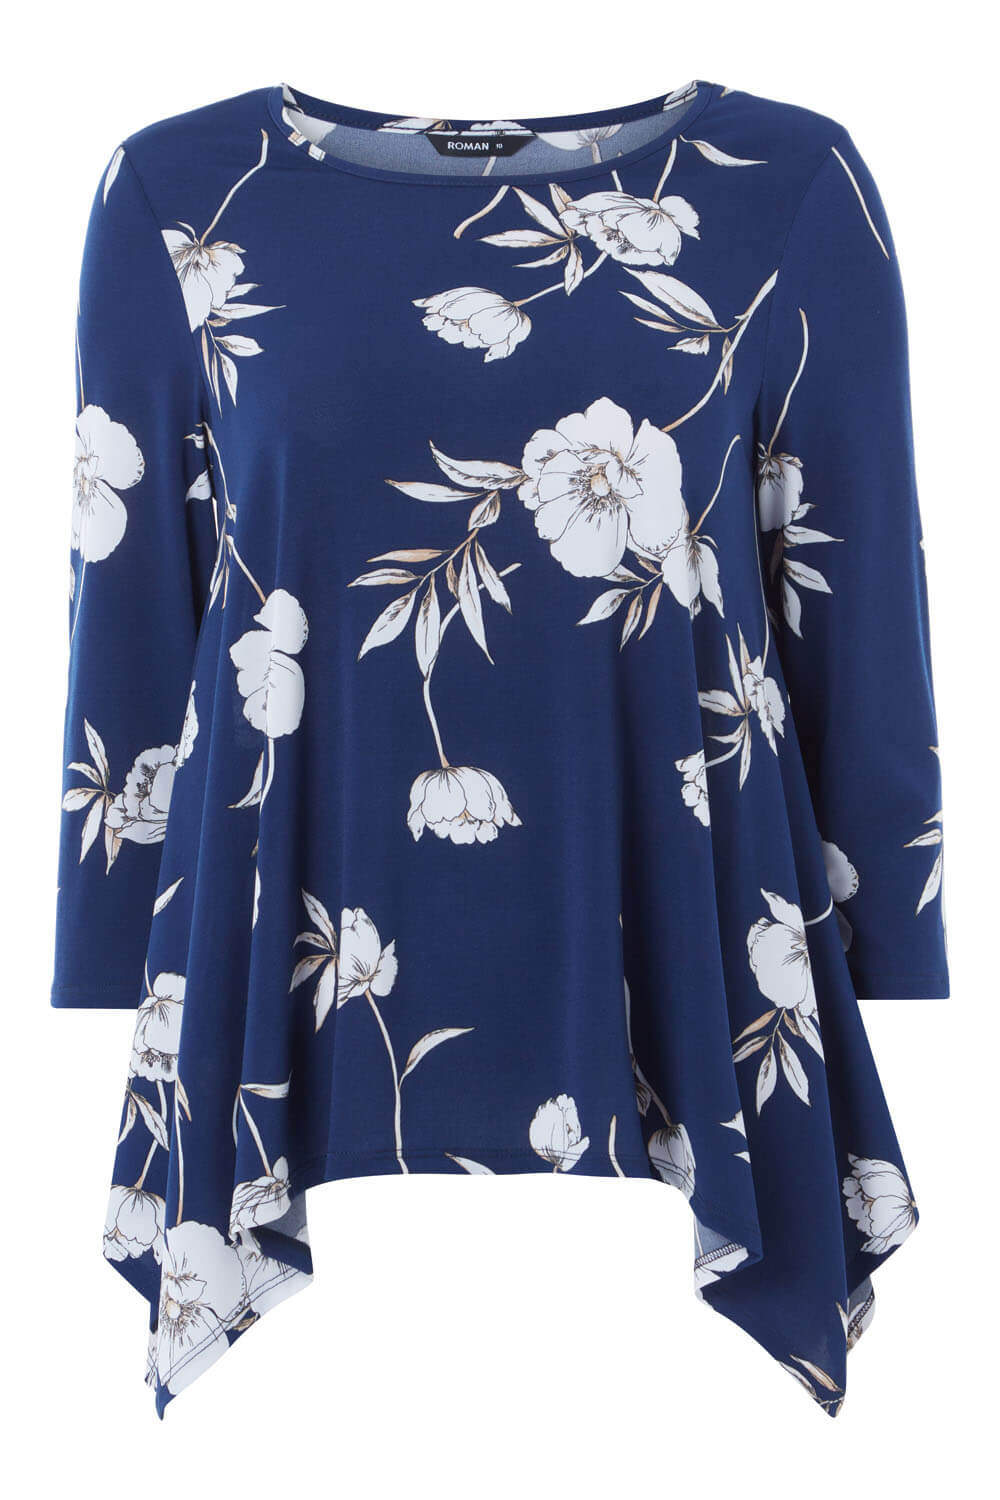 Navy  Floral 3/4 Sleeve Smock Top, Image 4 of 8